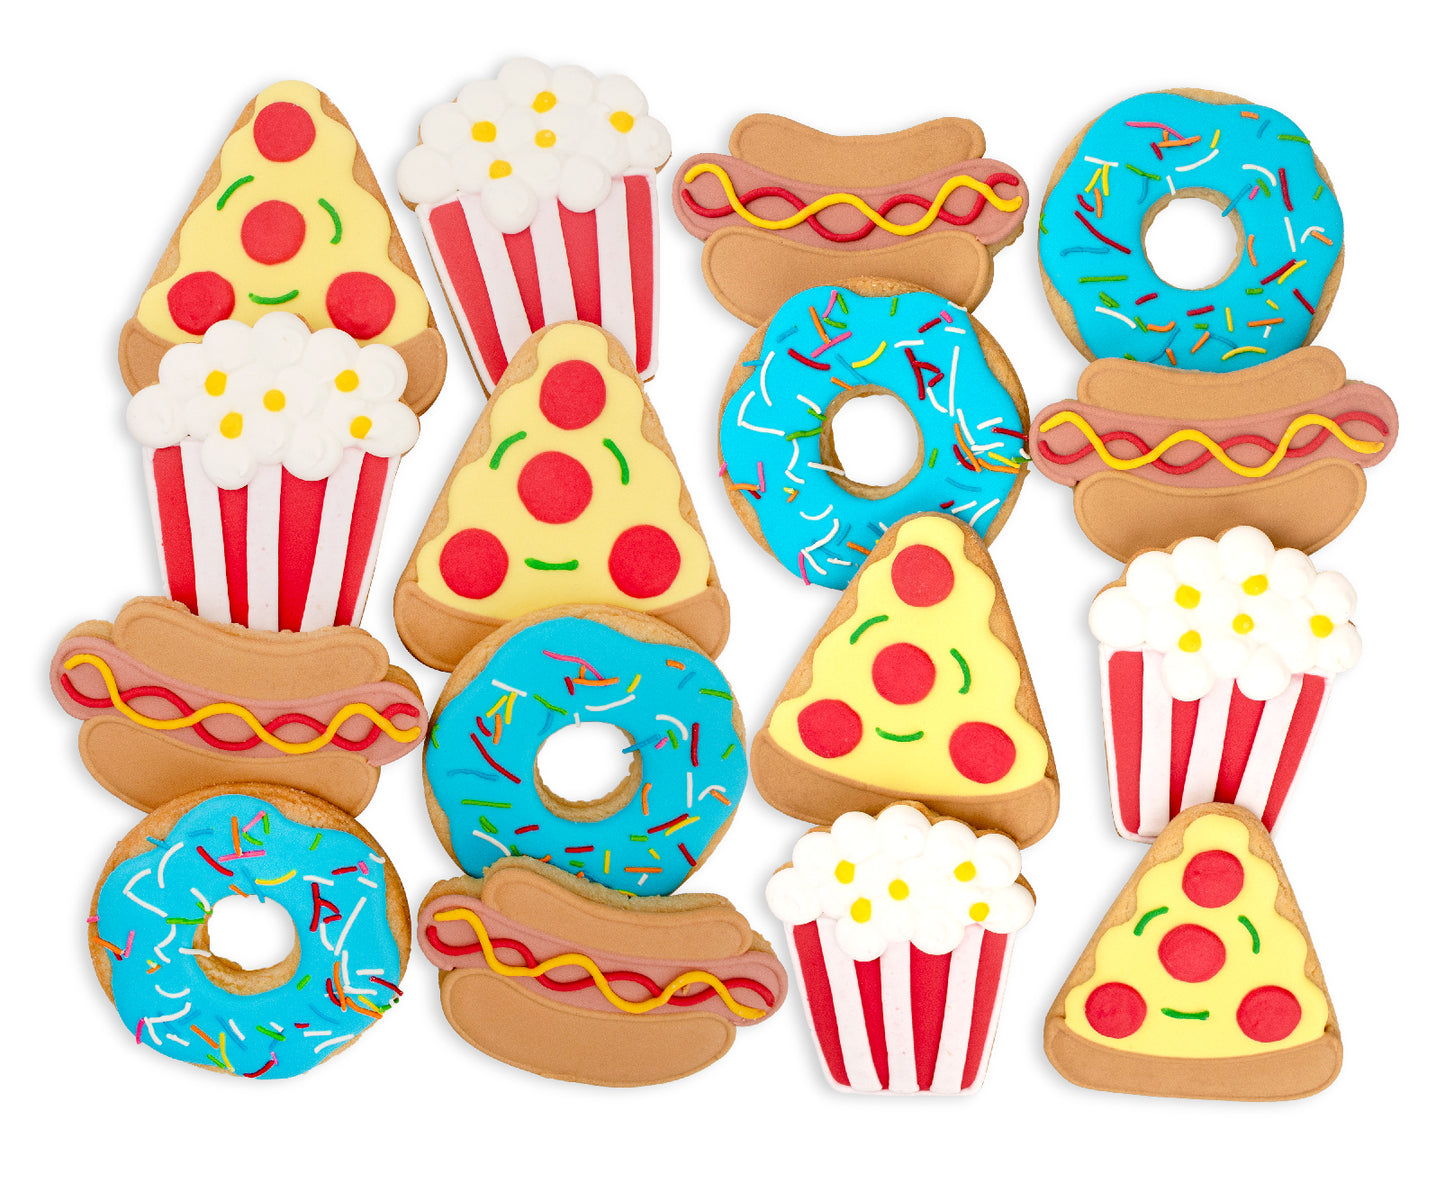 Cravings Hand-Decorated Cookies - 16 ct